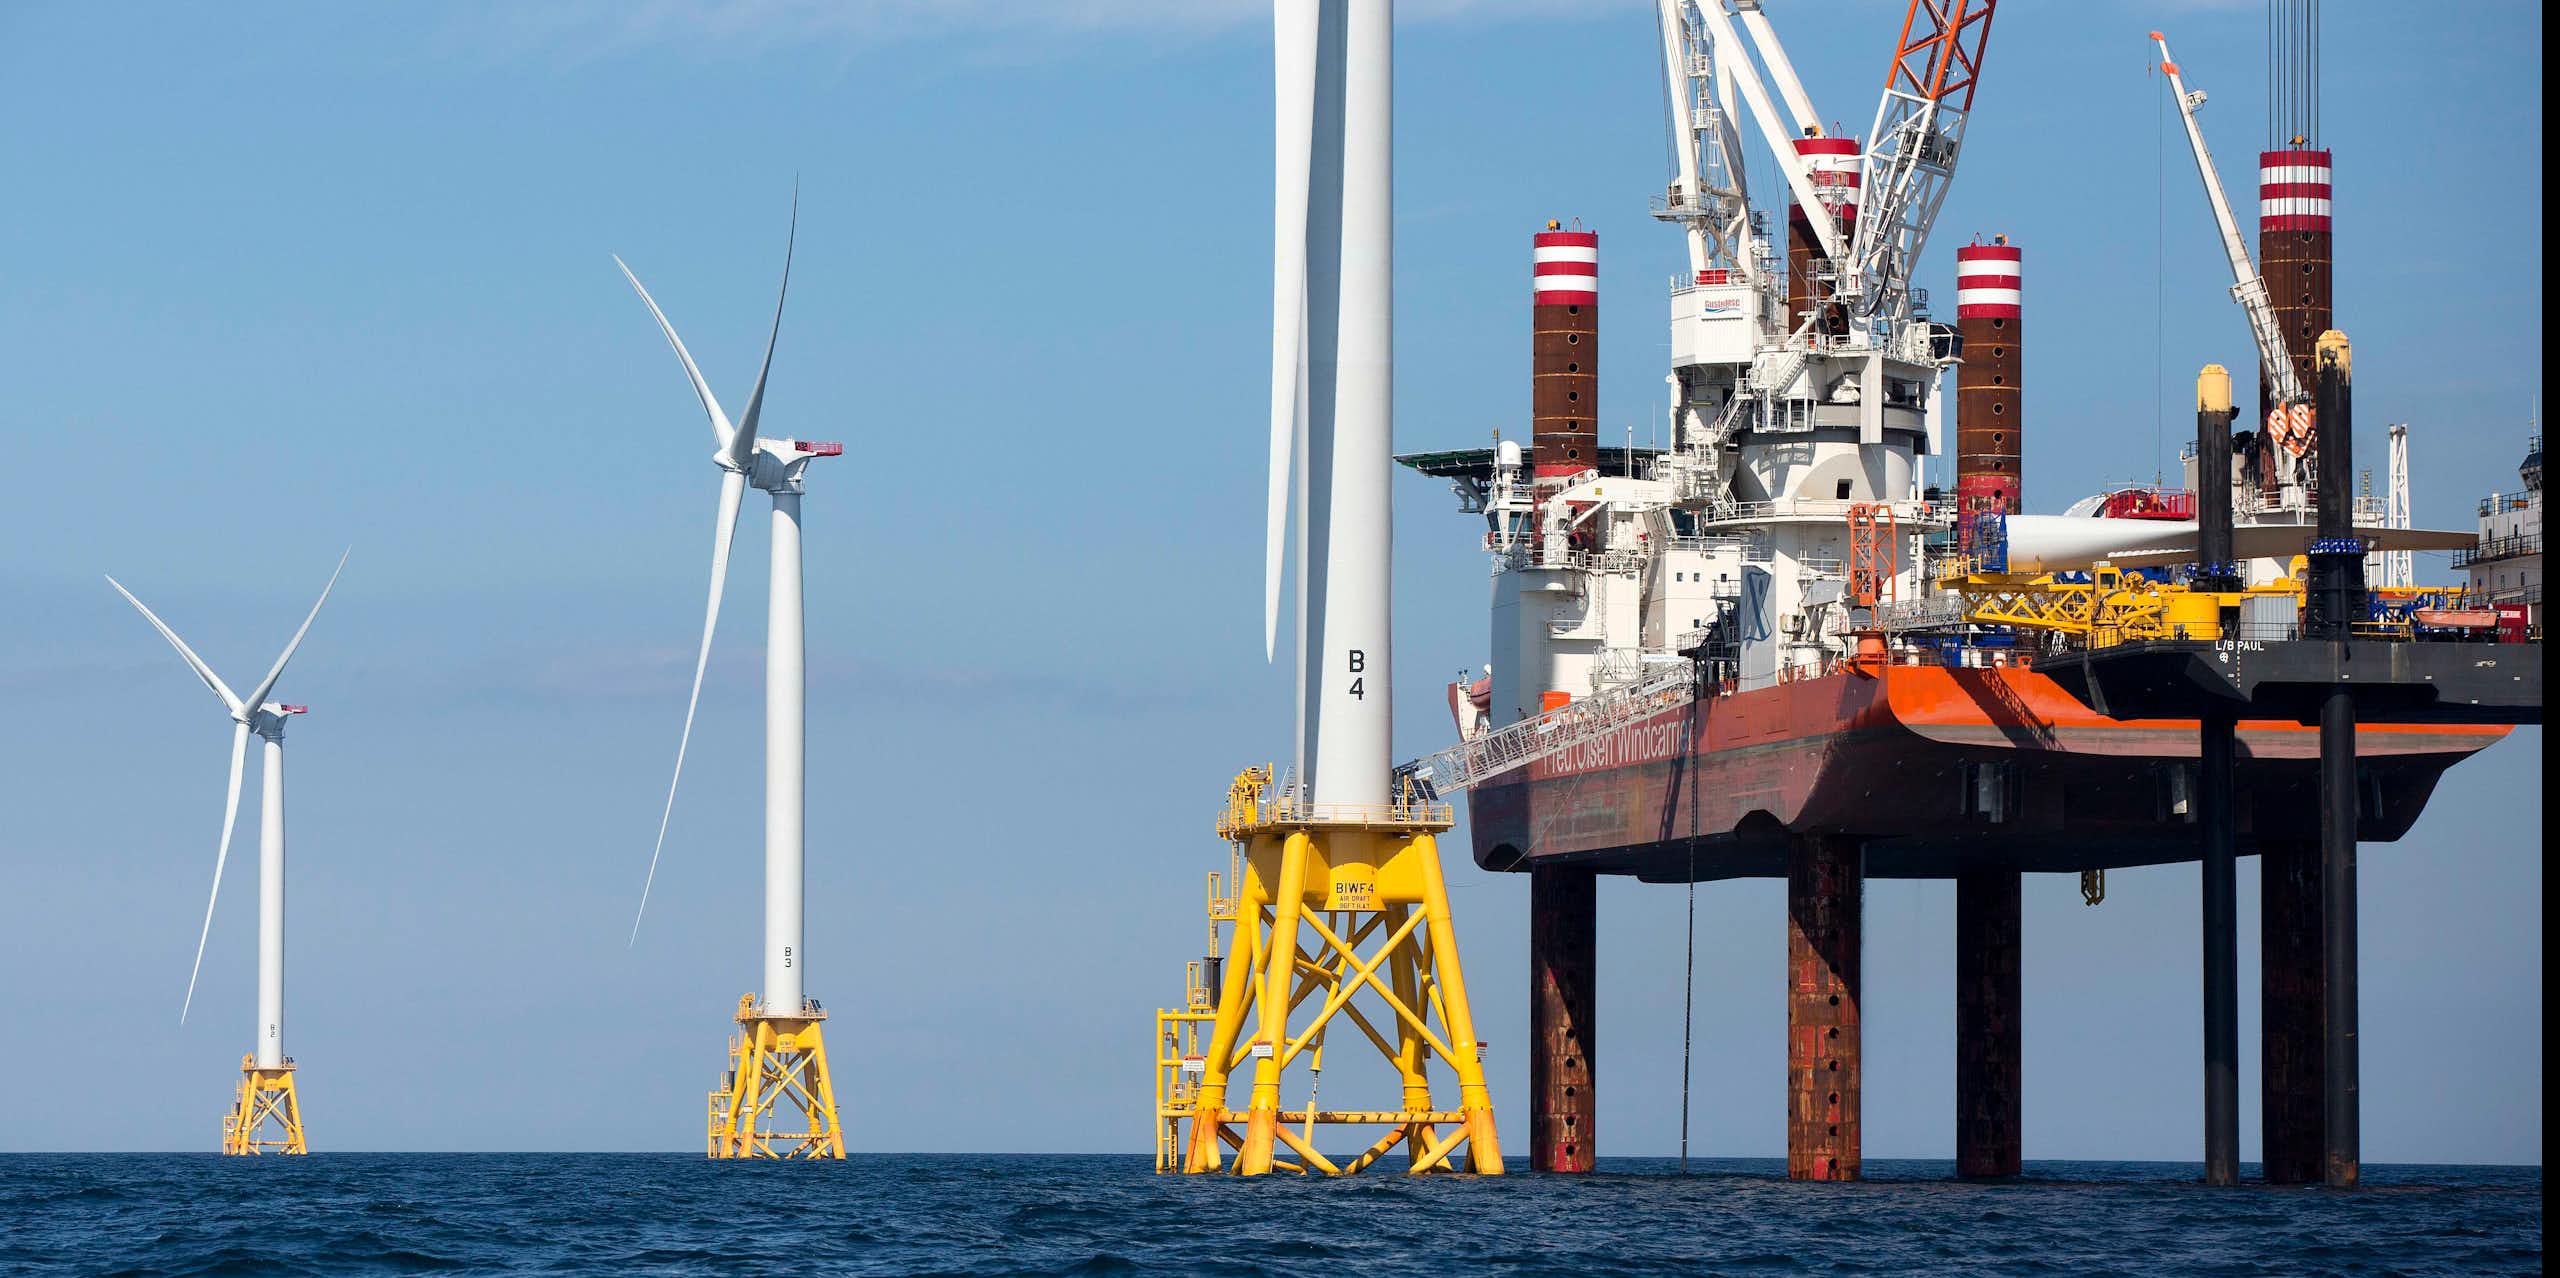 A large ship on stilts that stabilize it uses cranes to build giant offshore wind turbines and their posts.